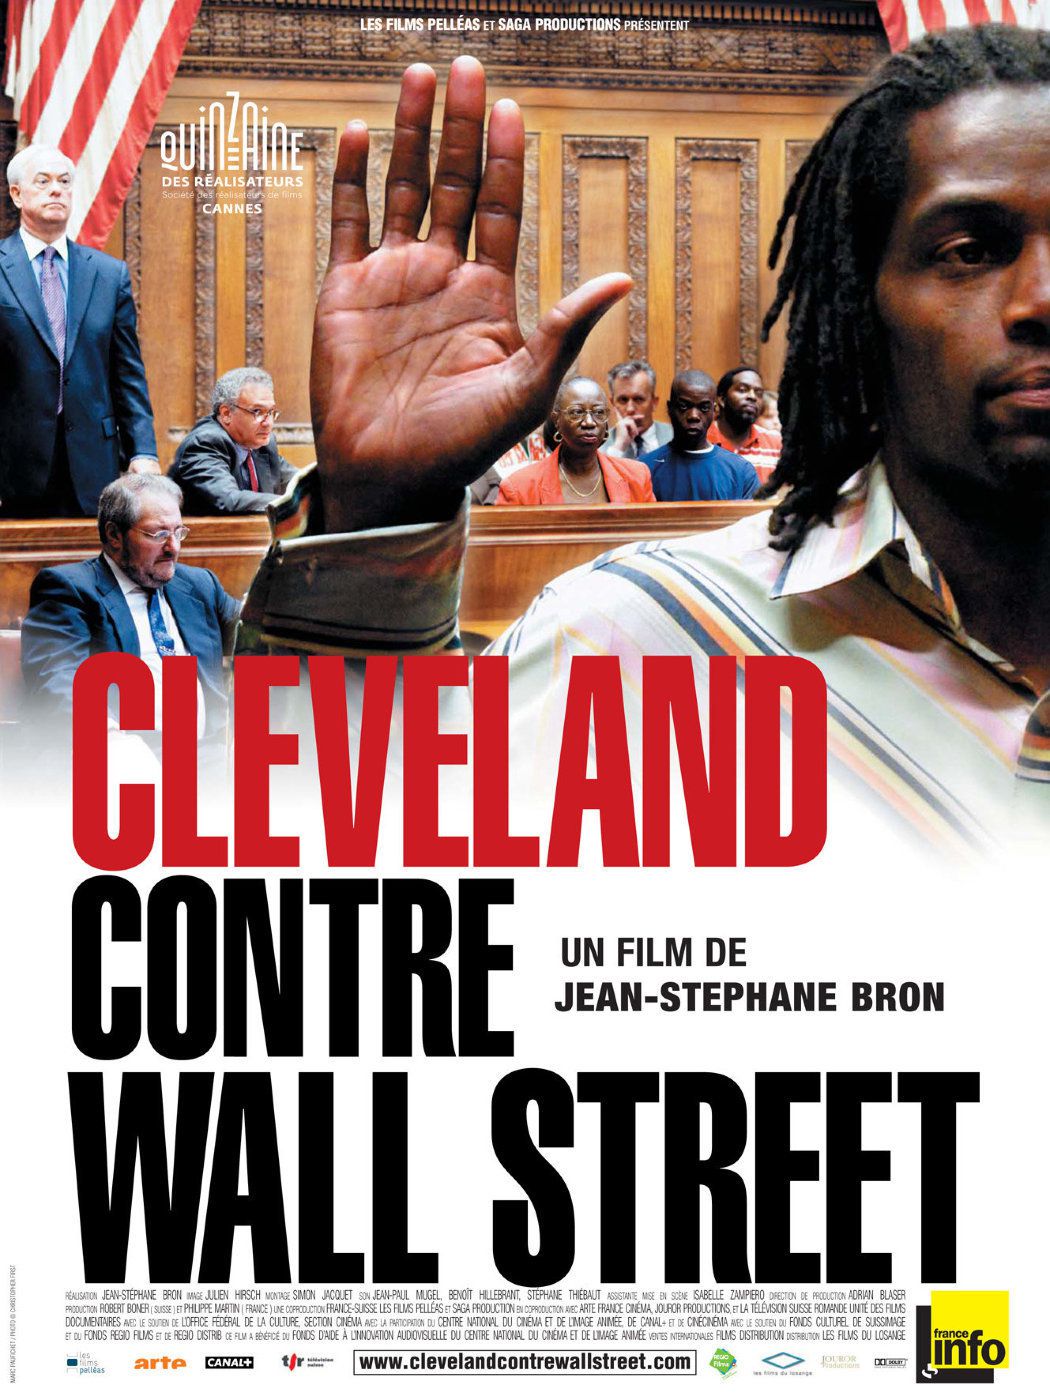 Cleveland contre Wall Street - Documentaire (2010) streaming VF gratuit complet